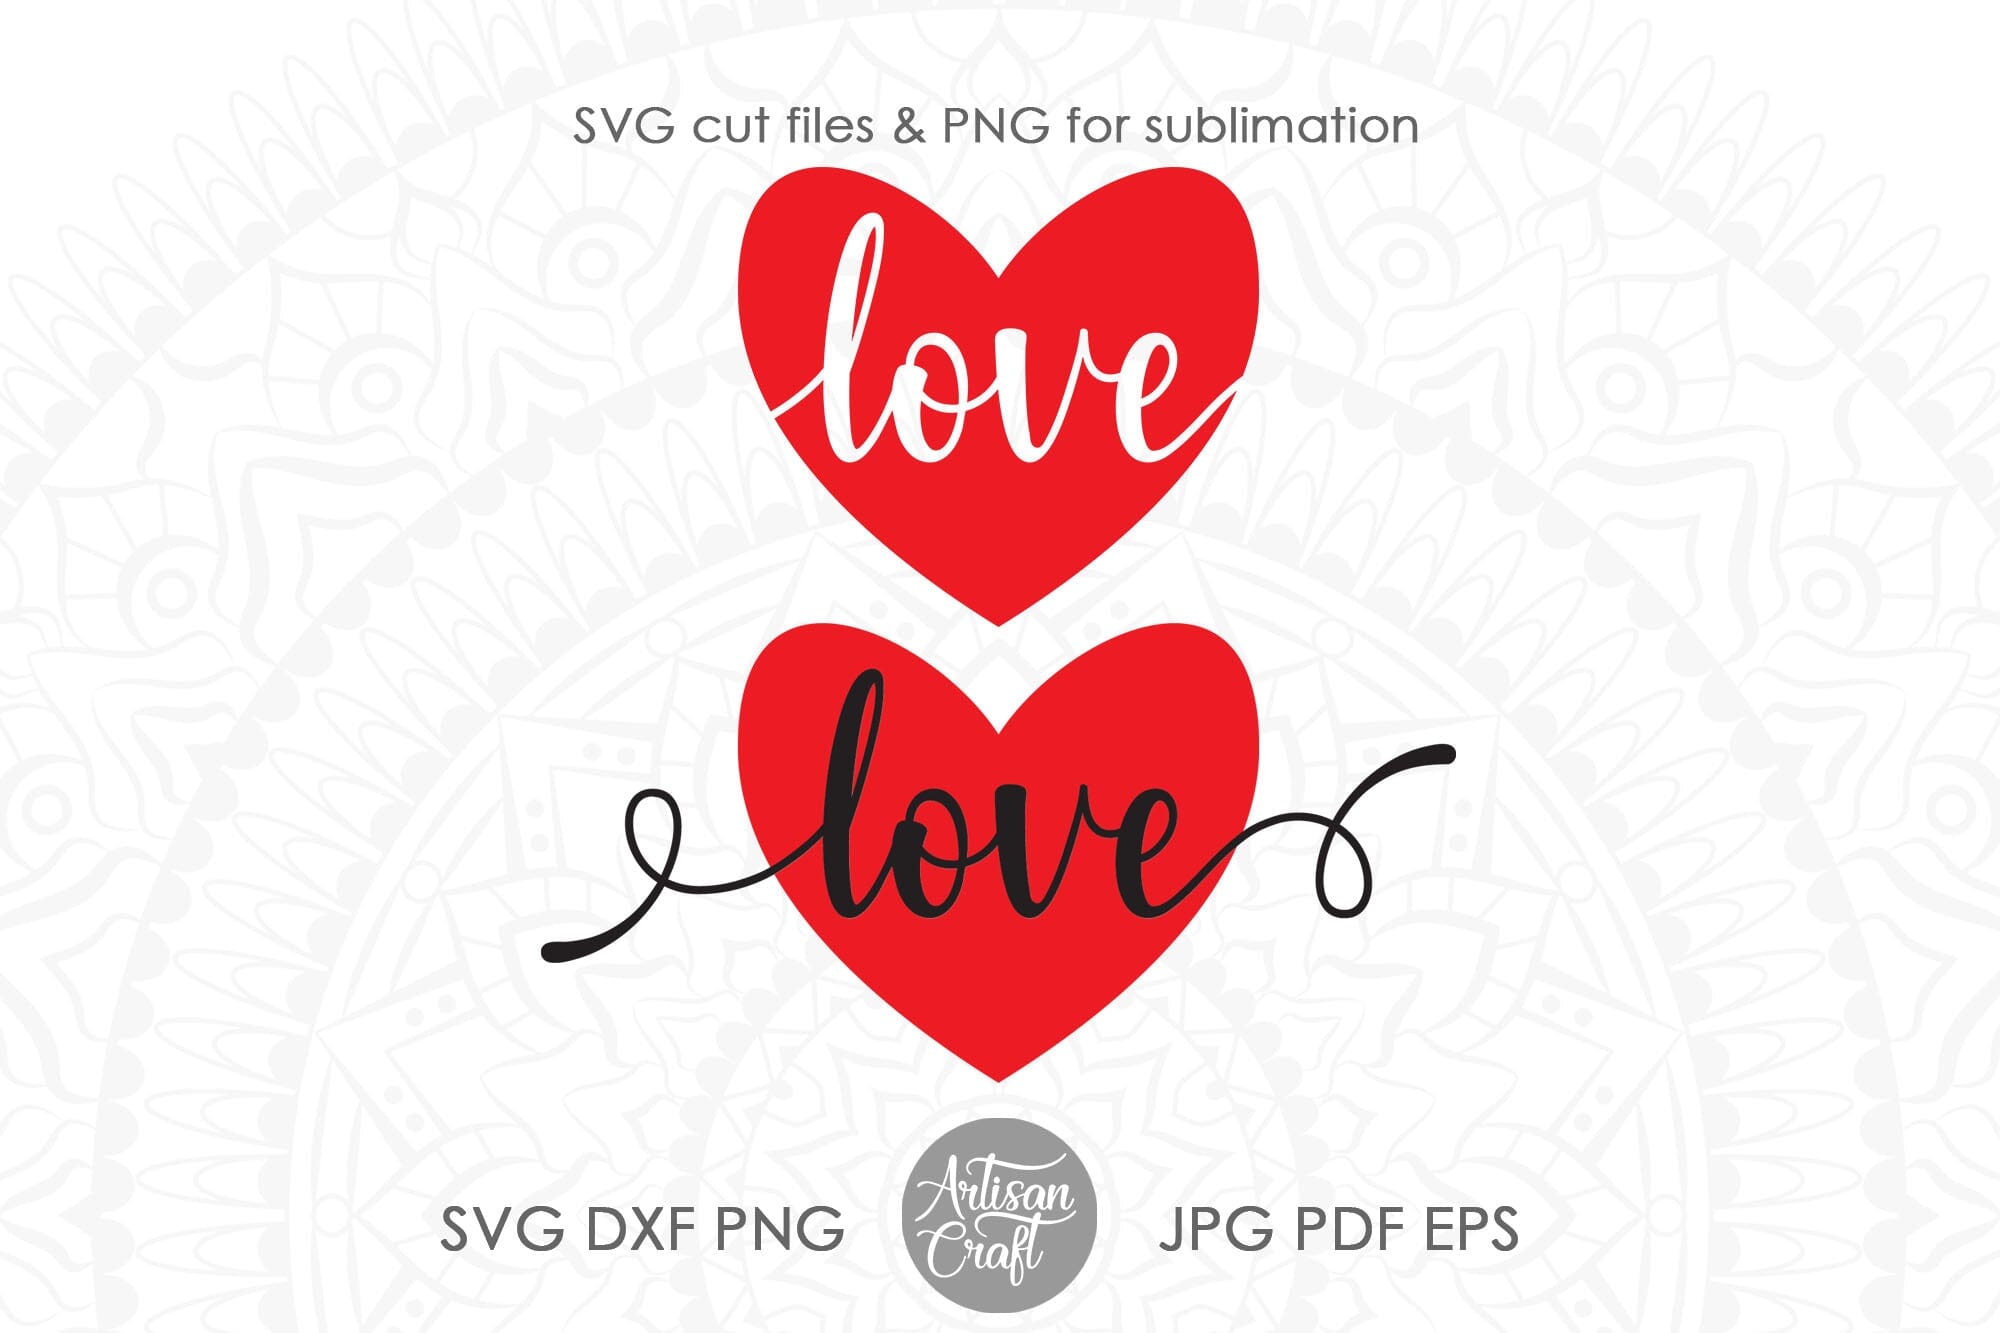 Double Love Heart Drawing in PDF, Illustrator, JPG, EPS, SVG, PNG -  Download